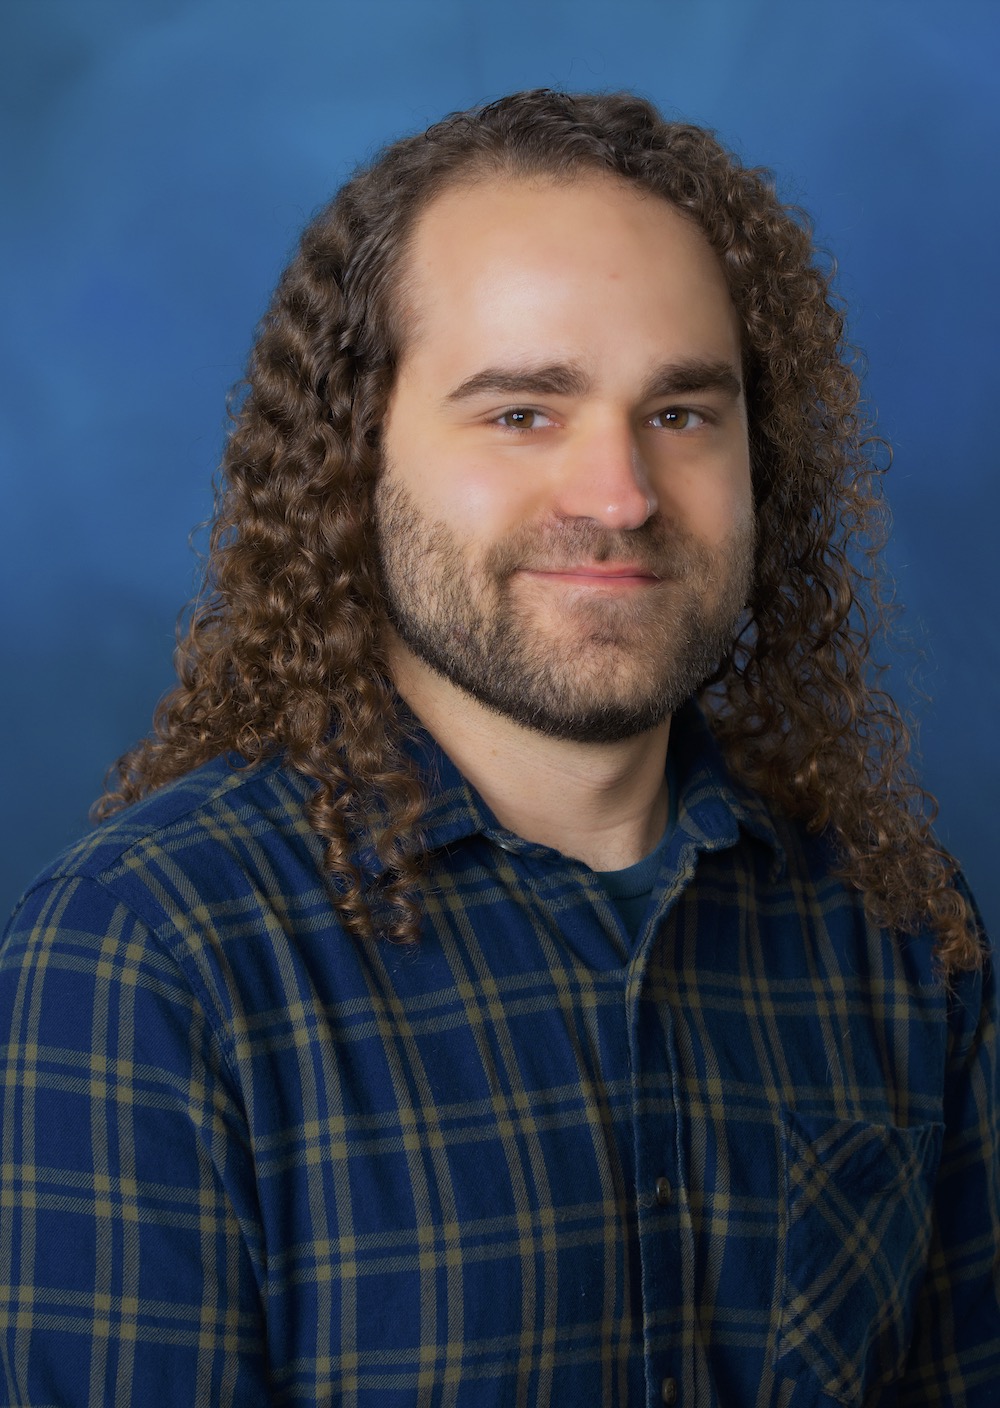 COSAM postdoctoral scientist selected for first COSAM Dean’s Research Award and wins 2022 Laboratory Astrophysics Division Dissertation Prize